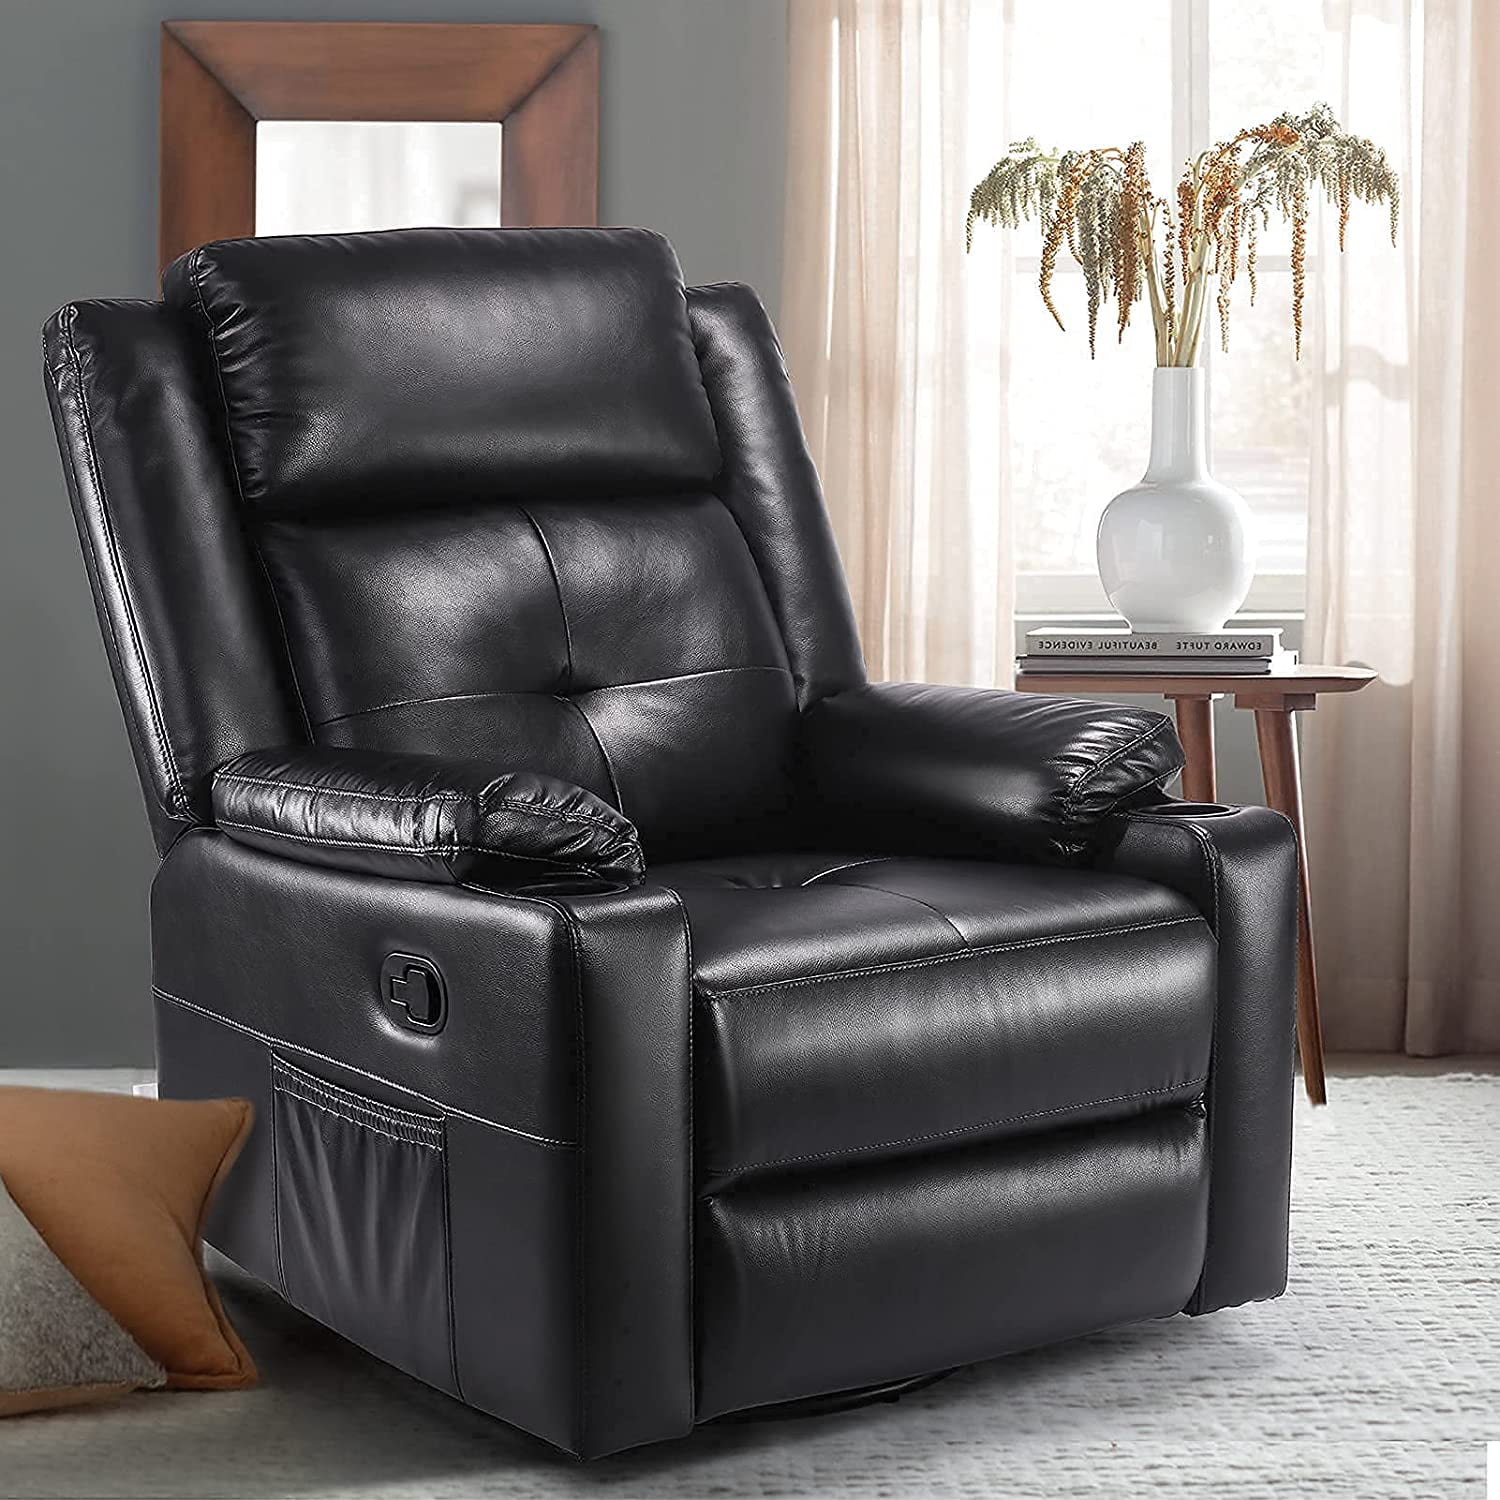 Qomotop Pu Leather Recliner Chair, Ergonomic Leather Recliners